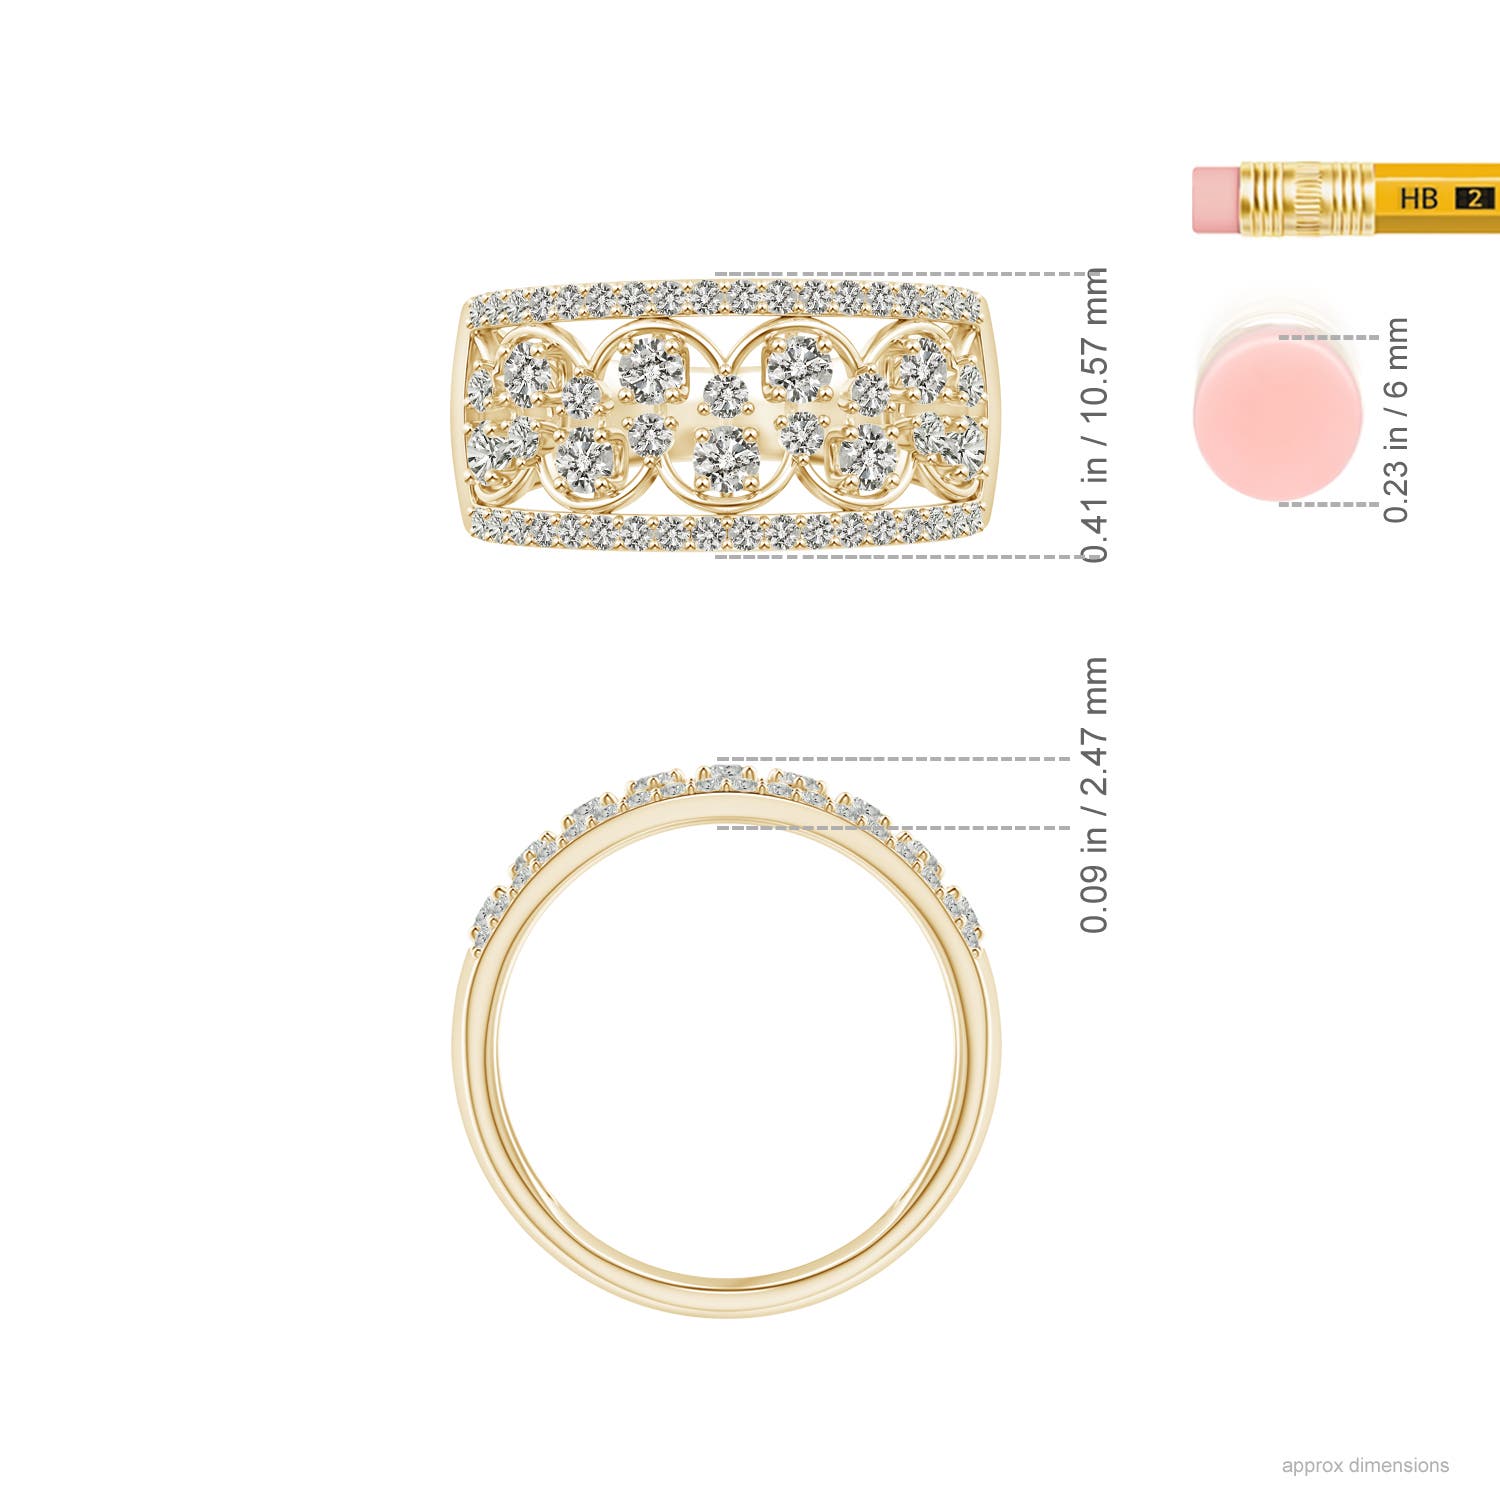 K, I3 / 0.88 CT / 14 KT Yellow Gold